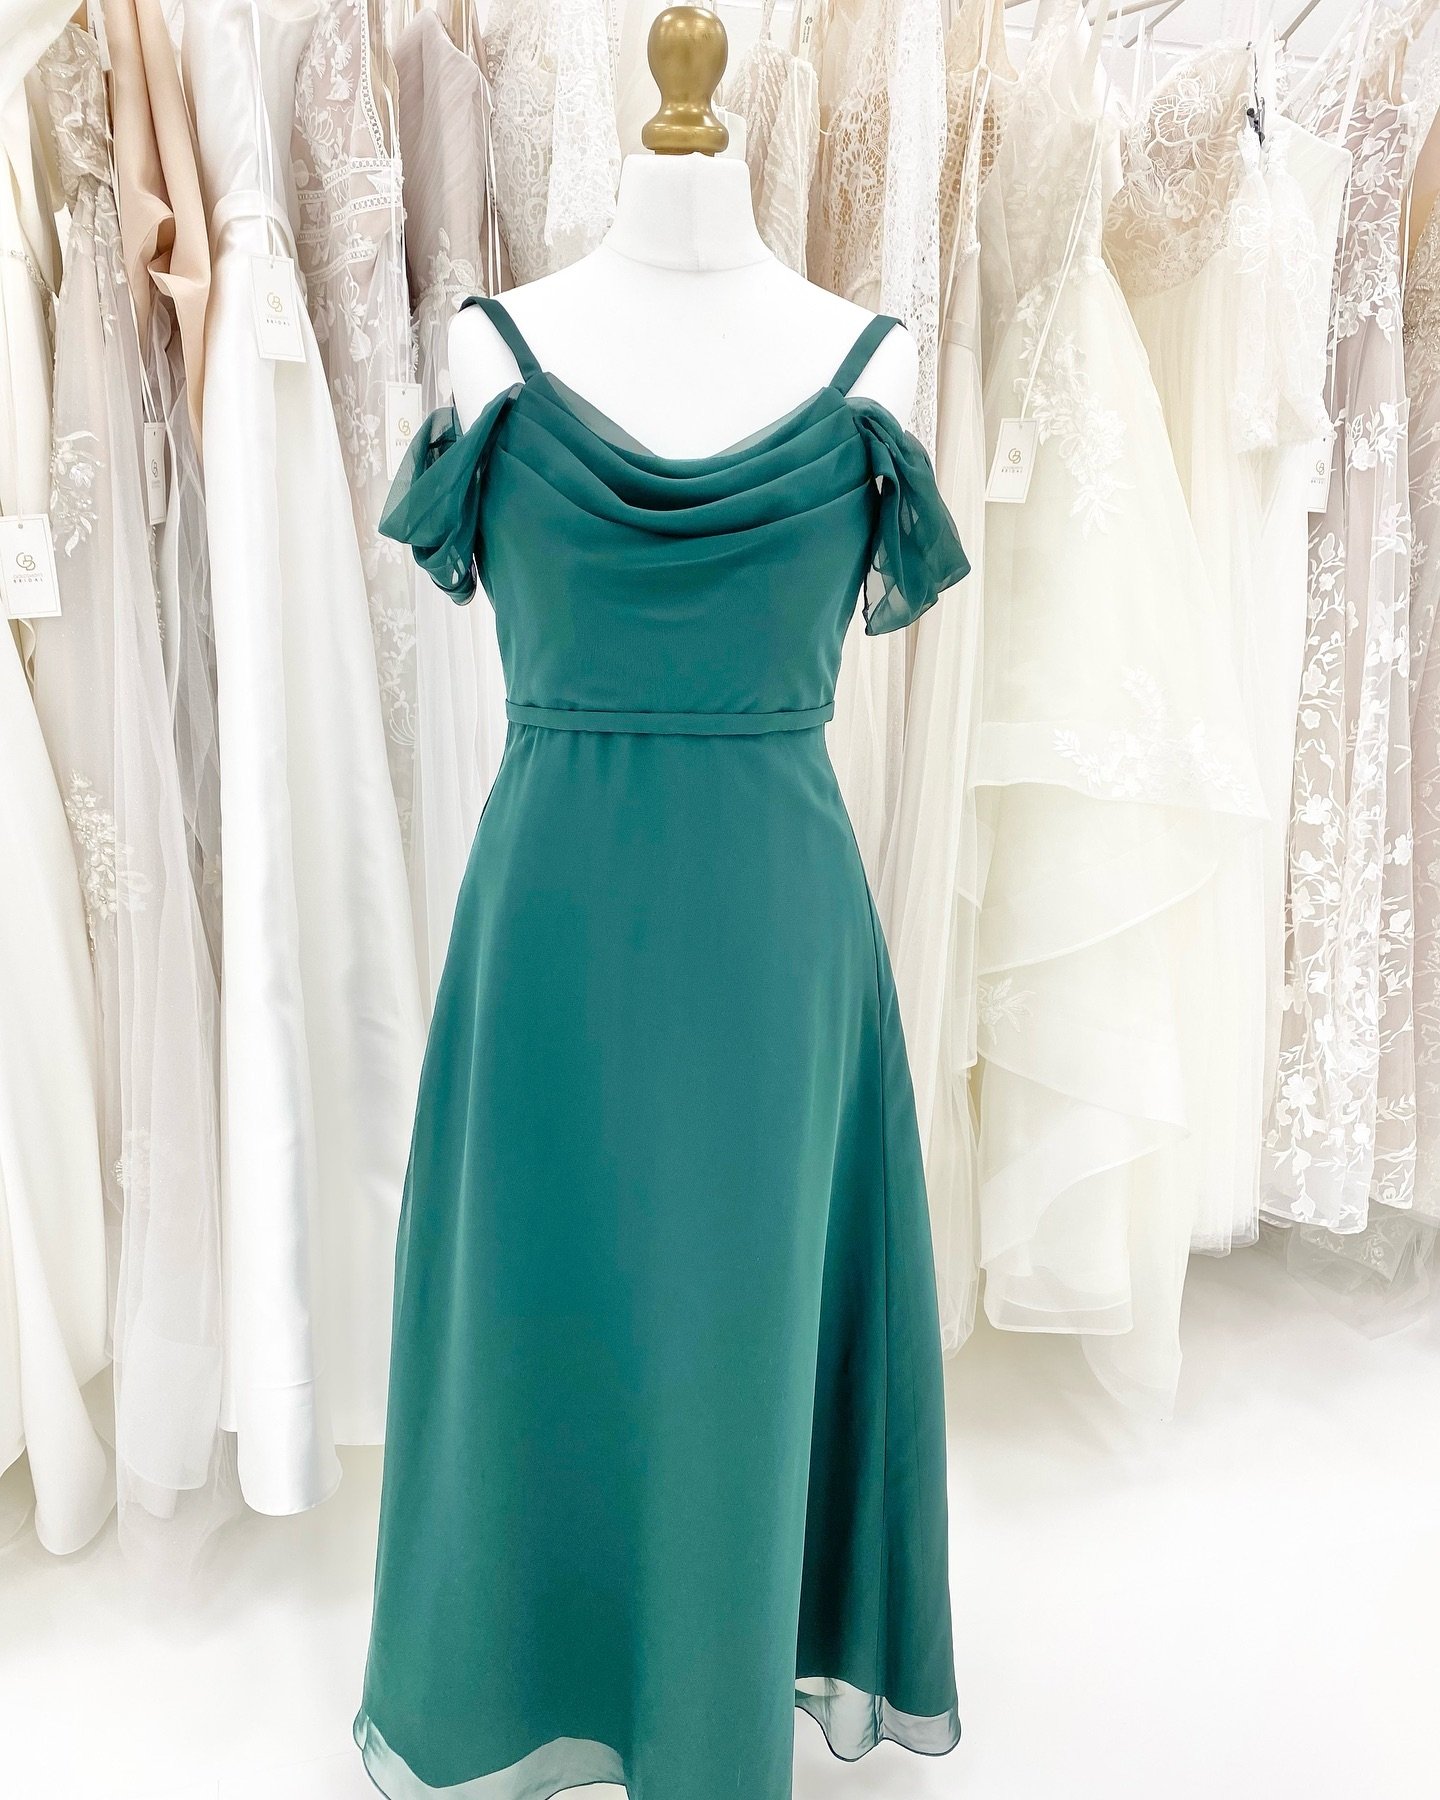 Teen bridesmaid dresses here in 51 colours